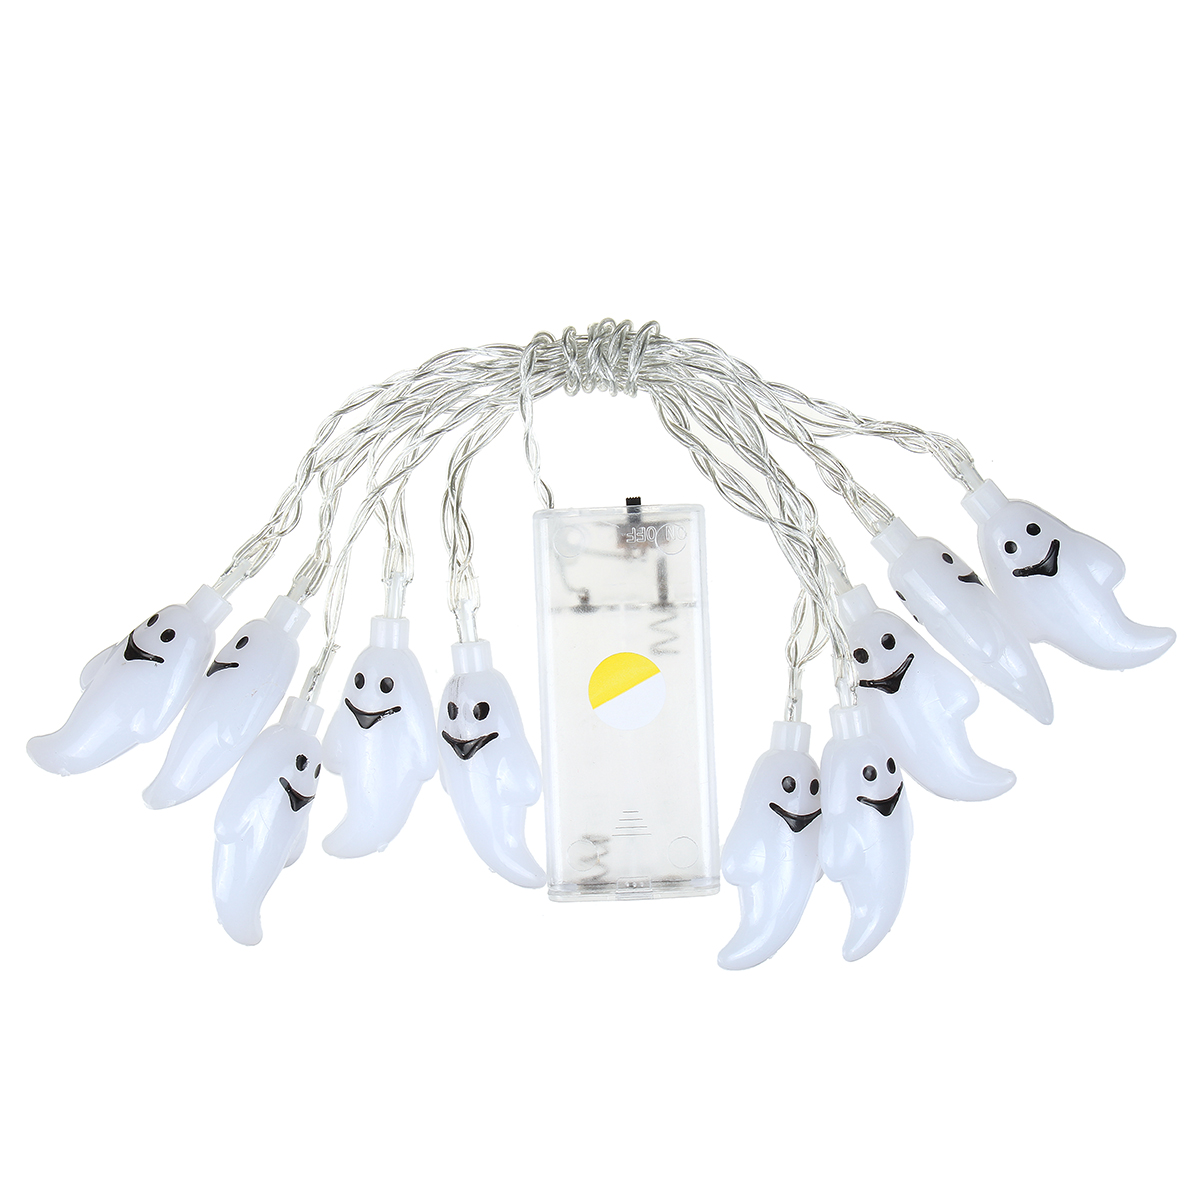 Specter Skeleton Ghost Eyes Pattern Halloween LED String Light Holiday Funny Party Outdoor Indoor Decoration